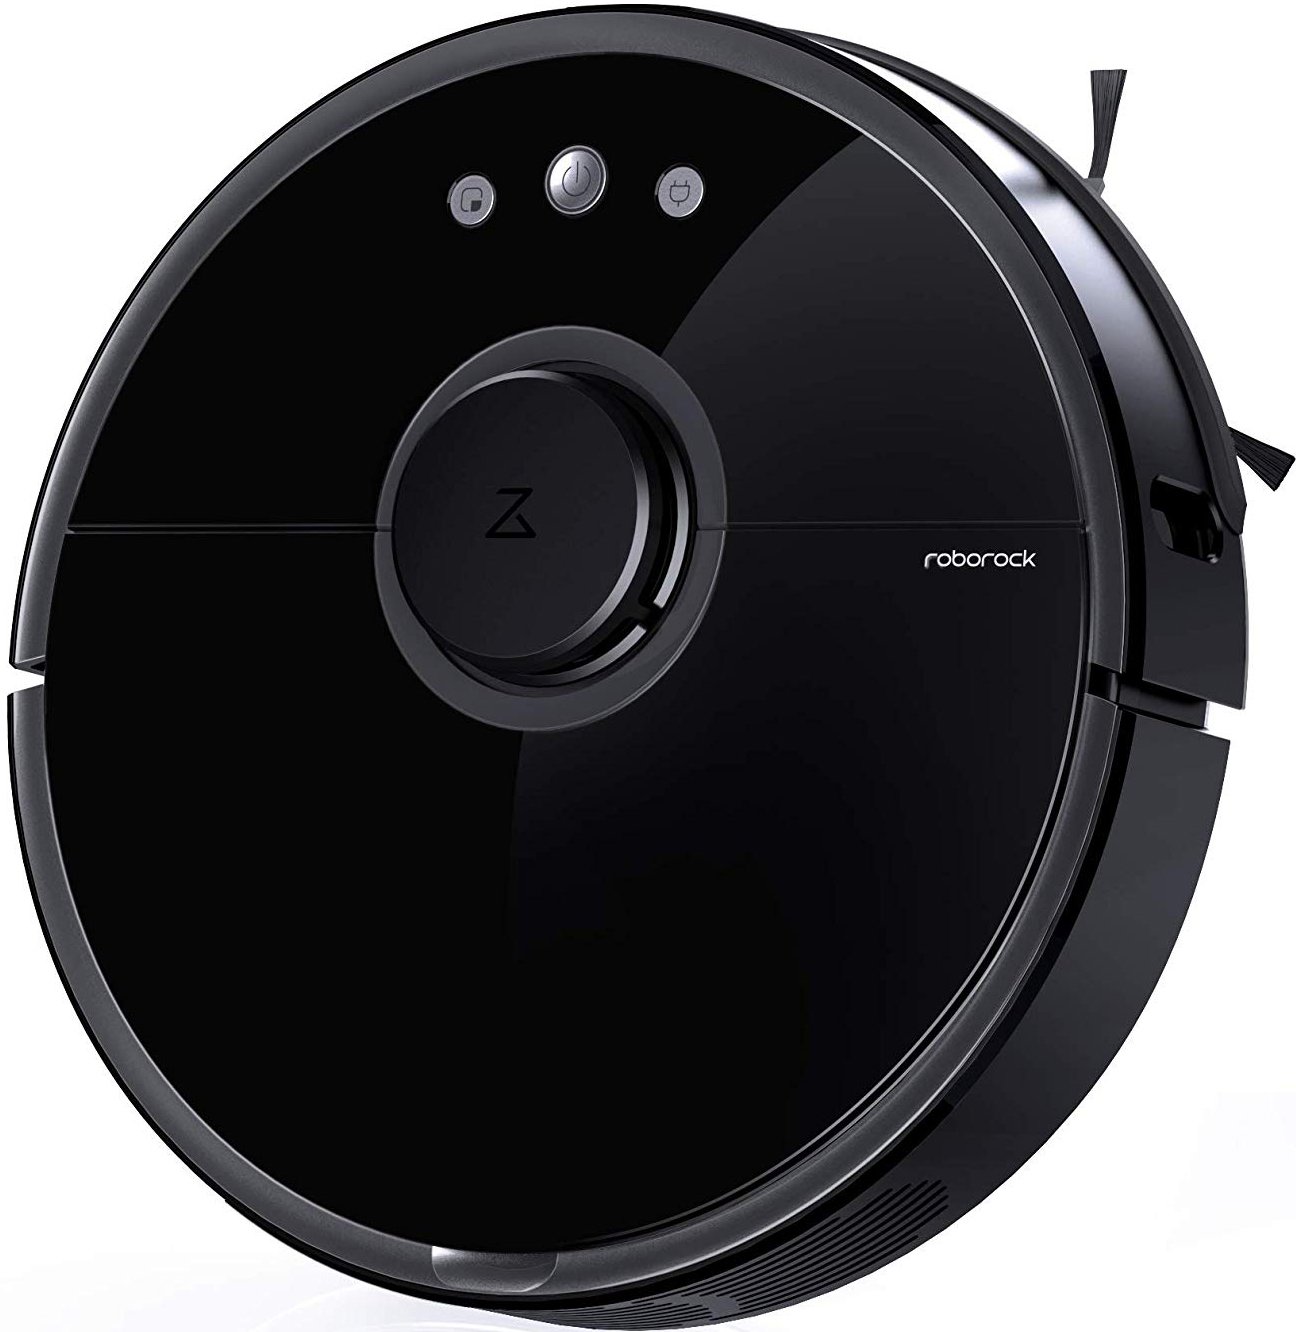 https://www.androidcentral.com/sites/androidcentral.com/files/article_images/2019/07/roborock-s5-robot-vacuum.jpg?itok=61O02lxU